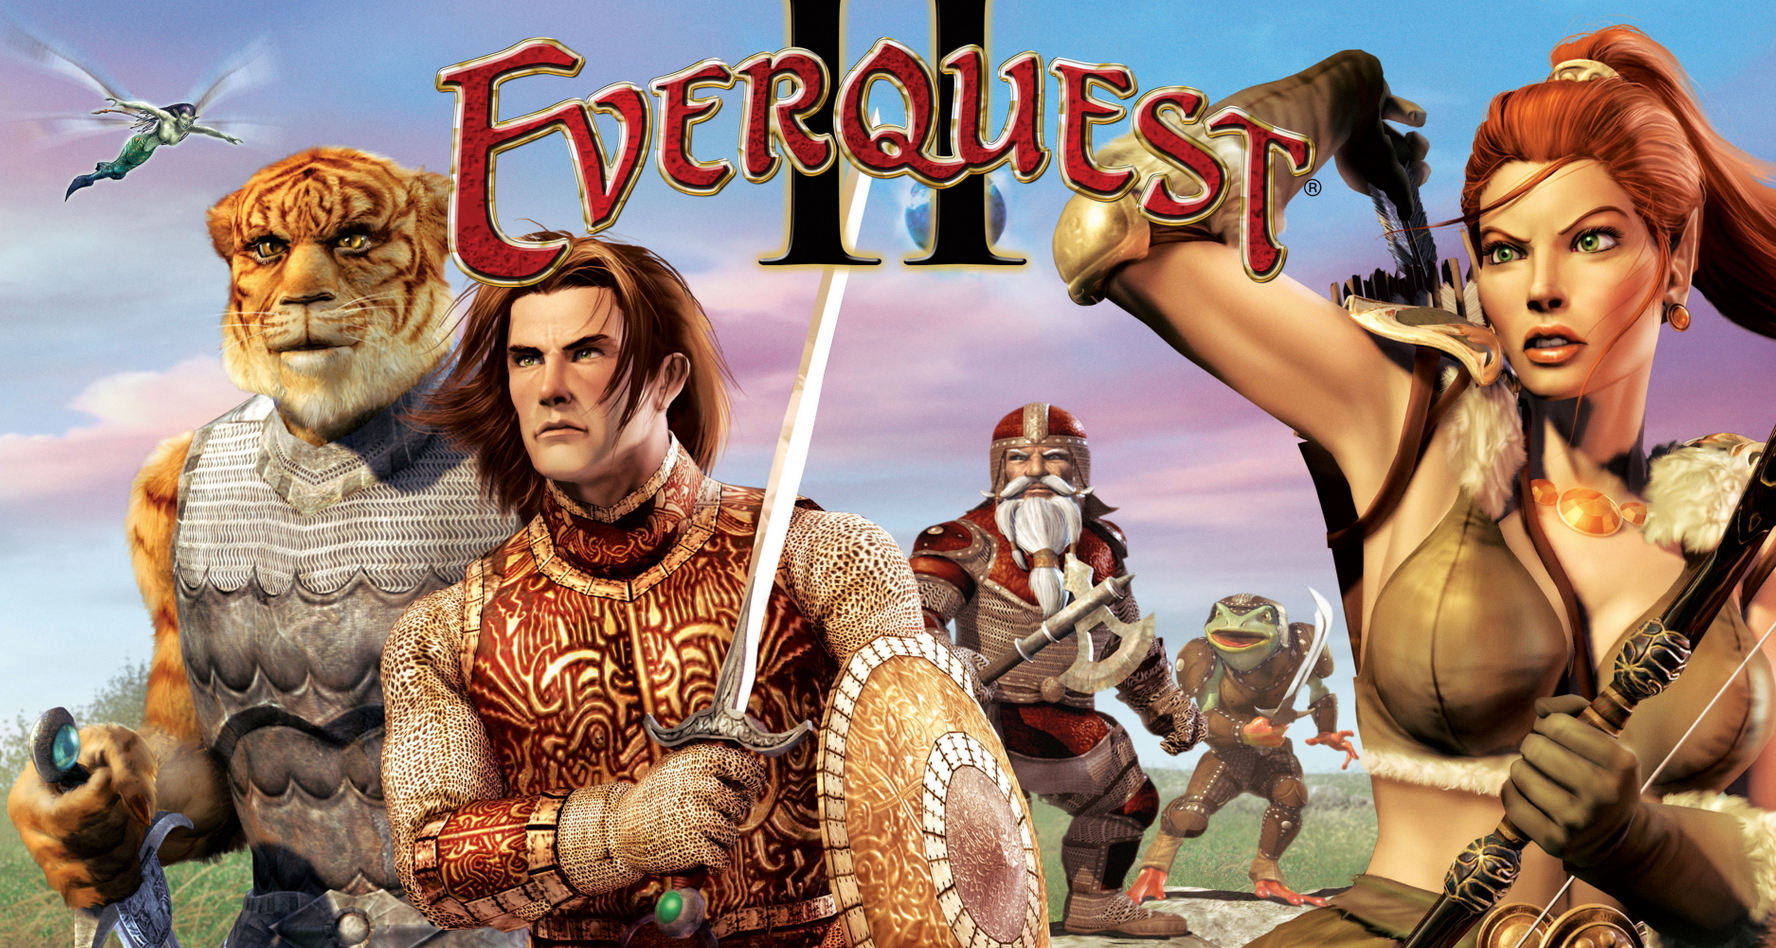 Everquest 2 Release 2022 Roadmap with Plans for New TLE Server, Expansion, and 64-Bit Client